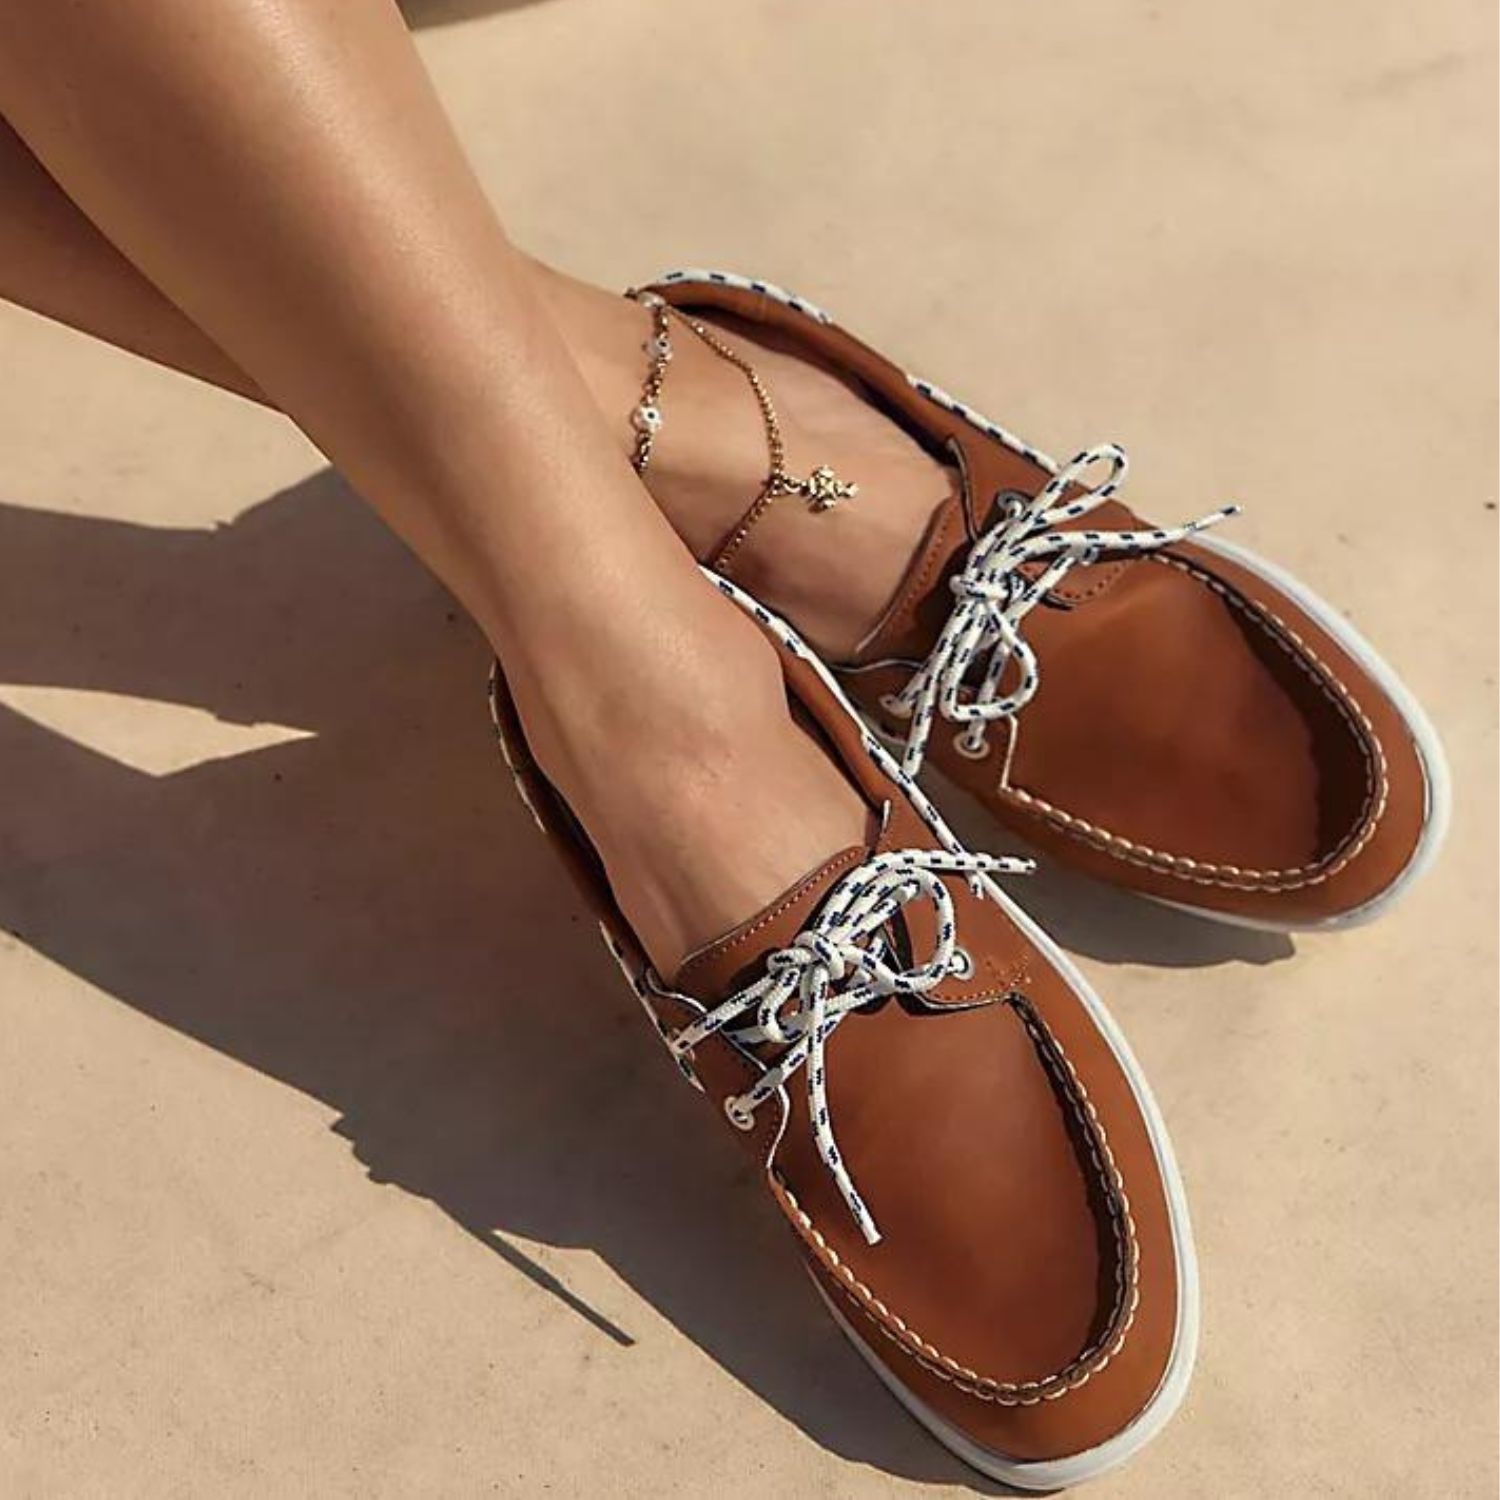  According to those in the fashion know, this is the only way to wear boat shoes this summer 